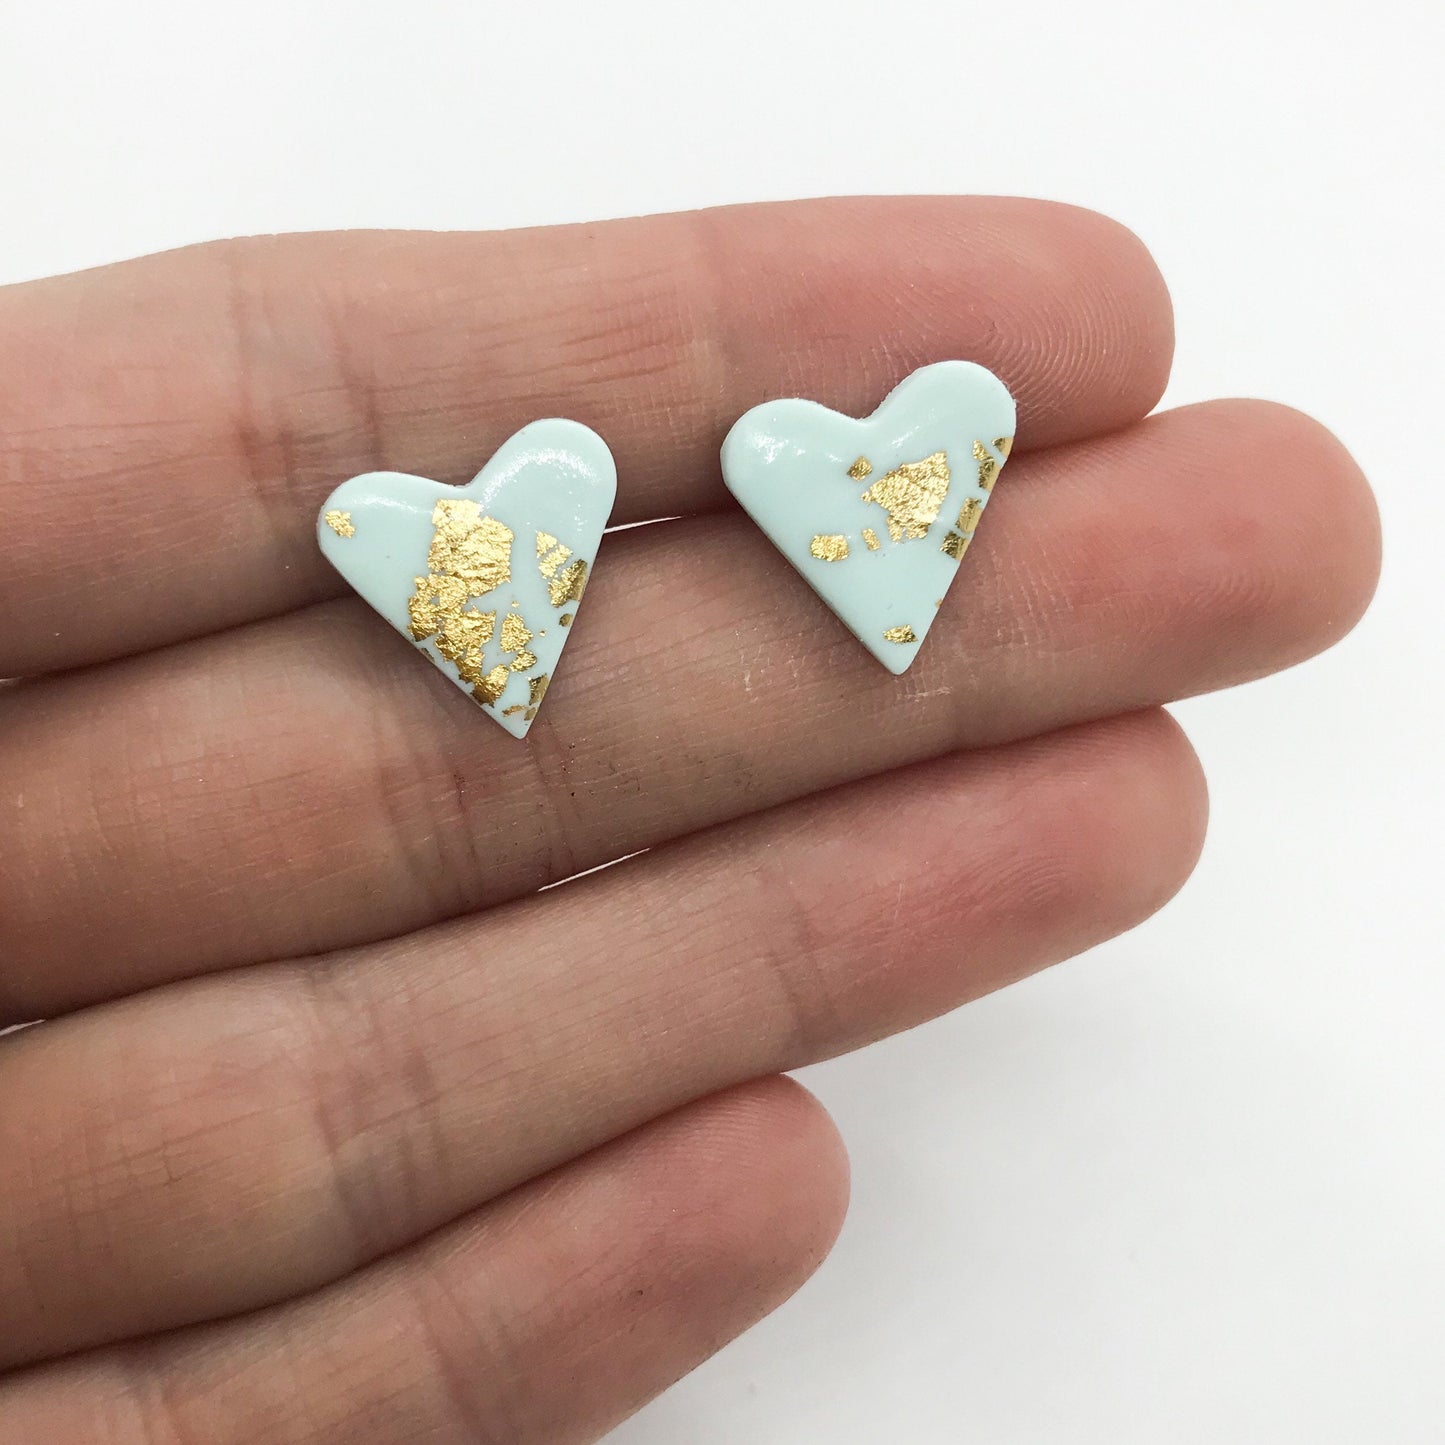 Heart earrings, green & gold leaf polymer clay stud earrings, beautiful birthday gift for her, girlfriend gift, post box gift